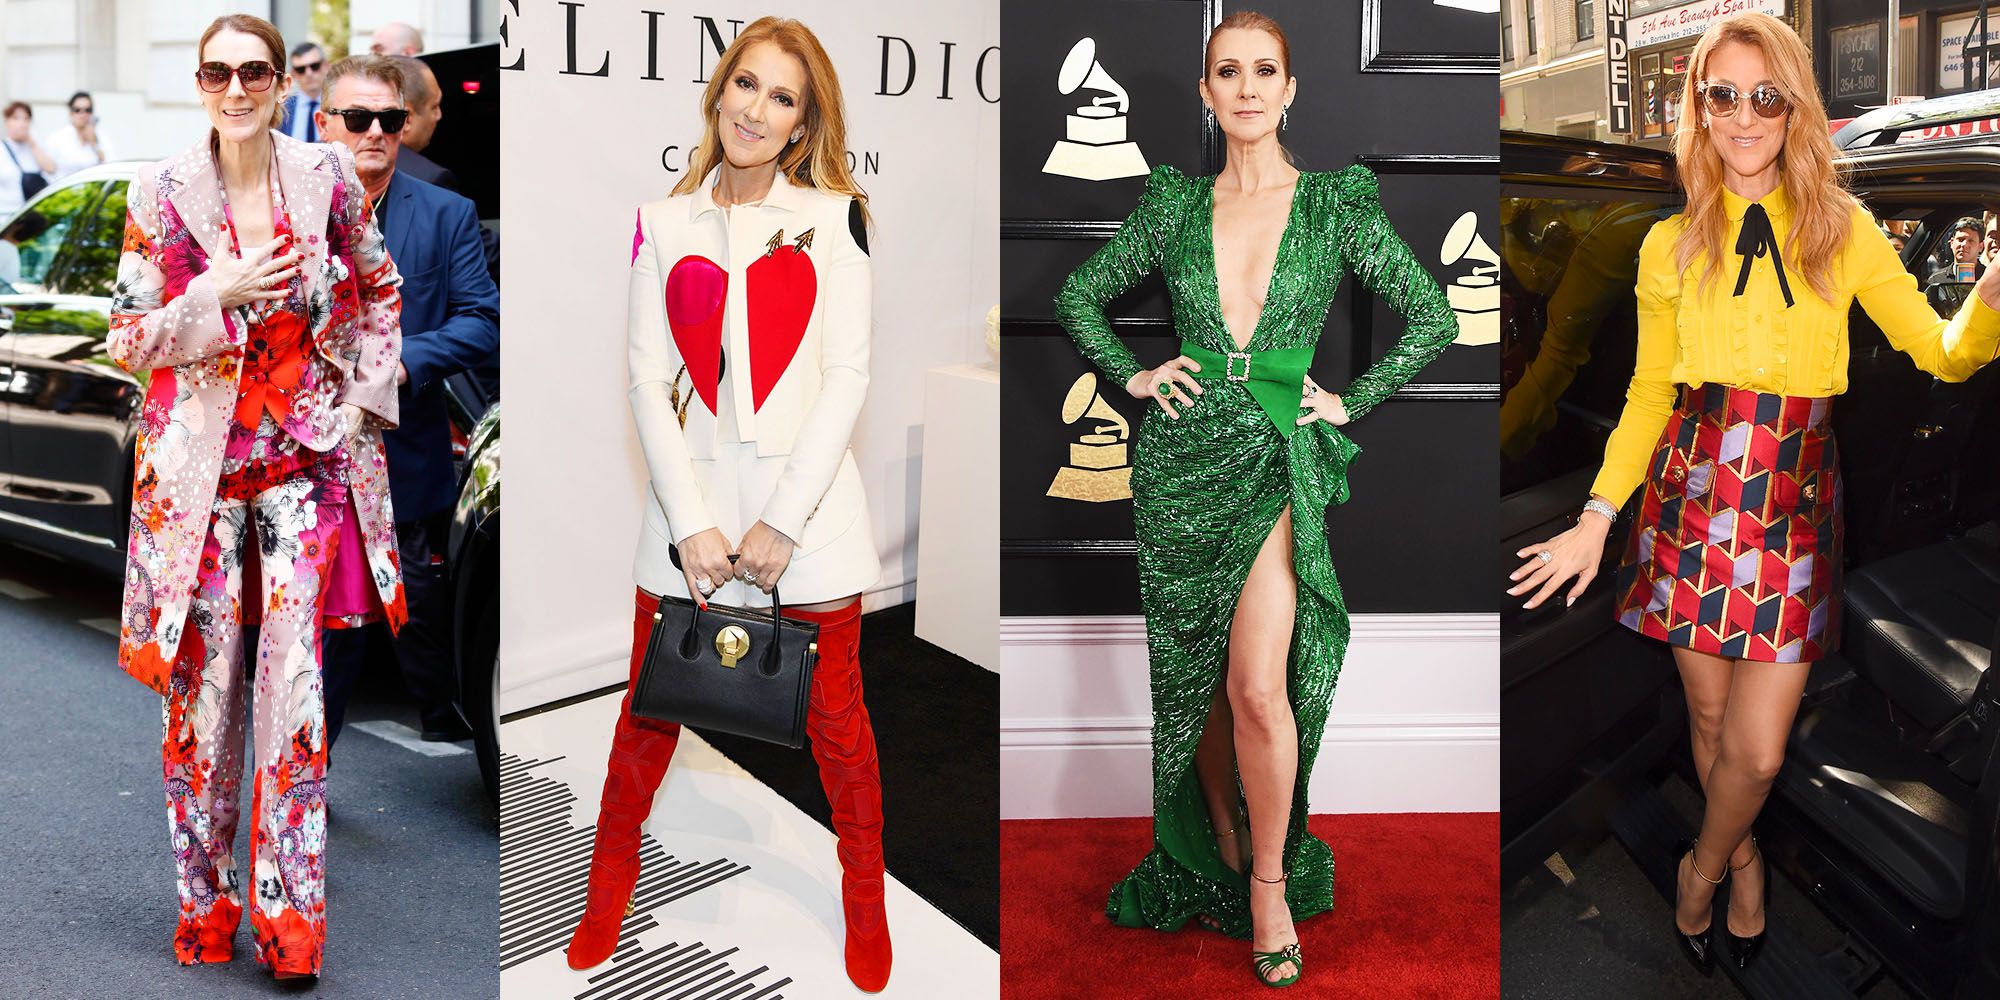 Celine Dion's Style Evolution, In Photos